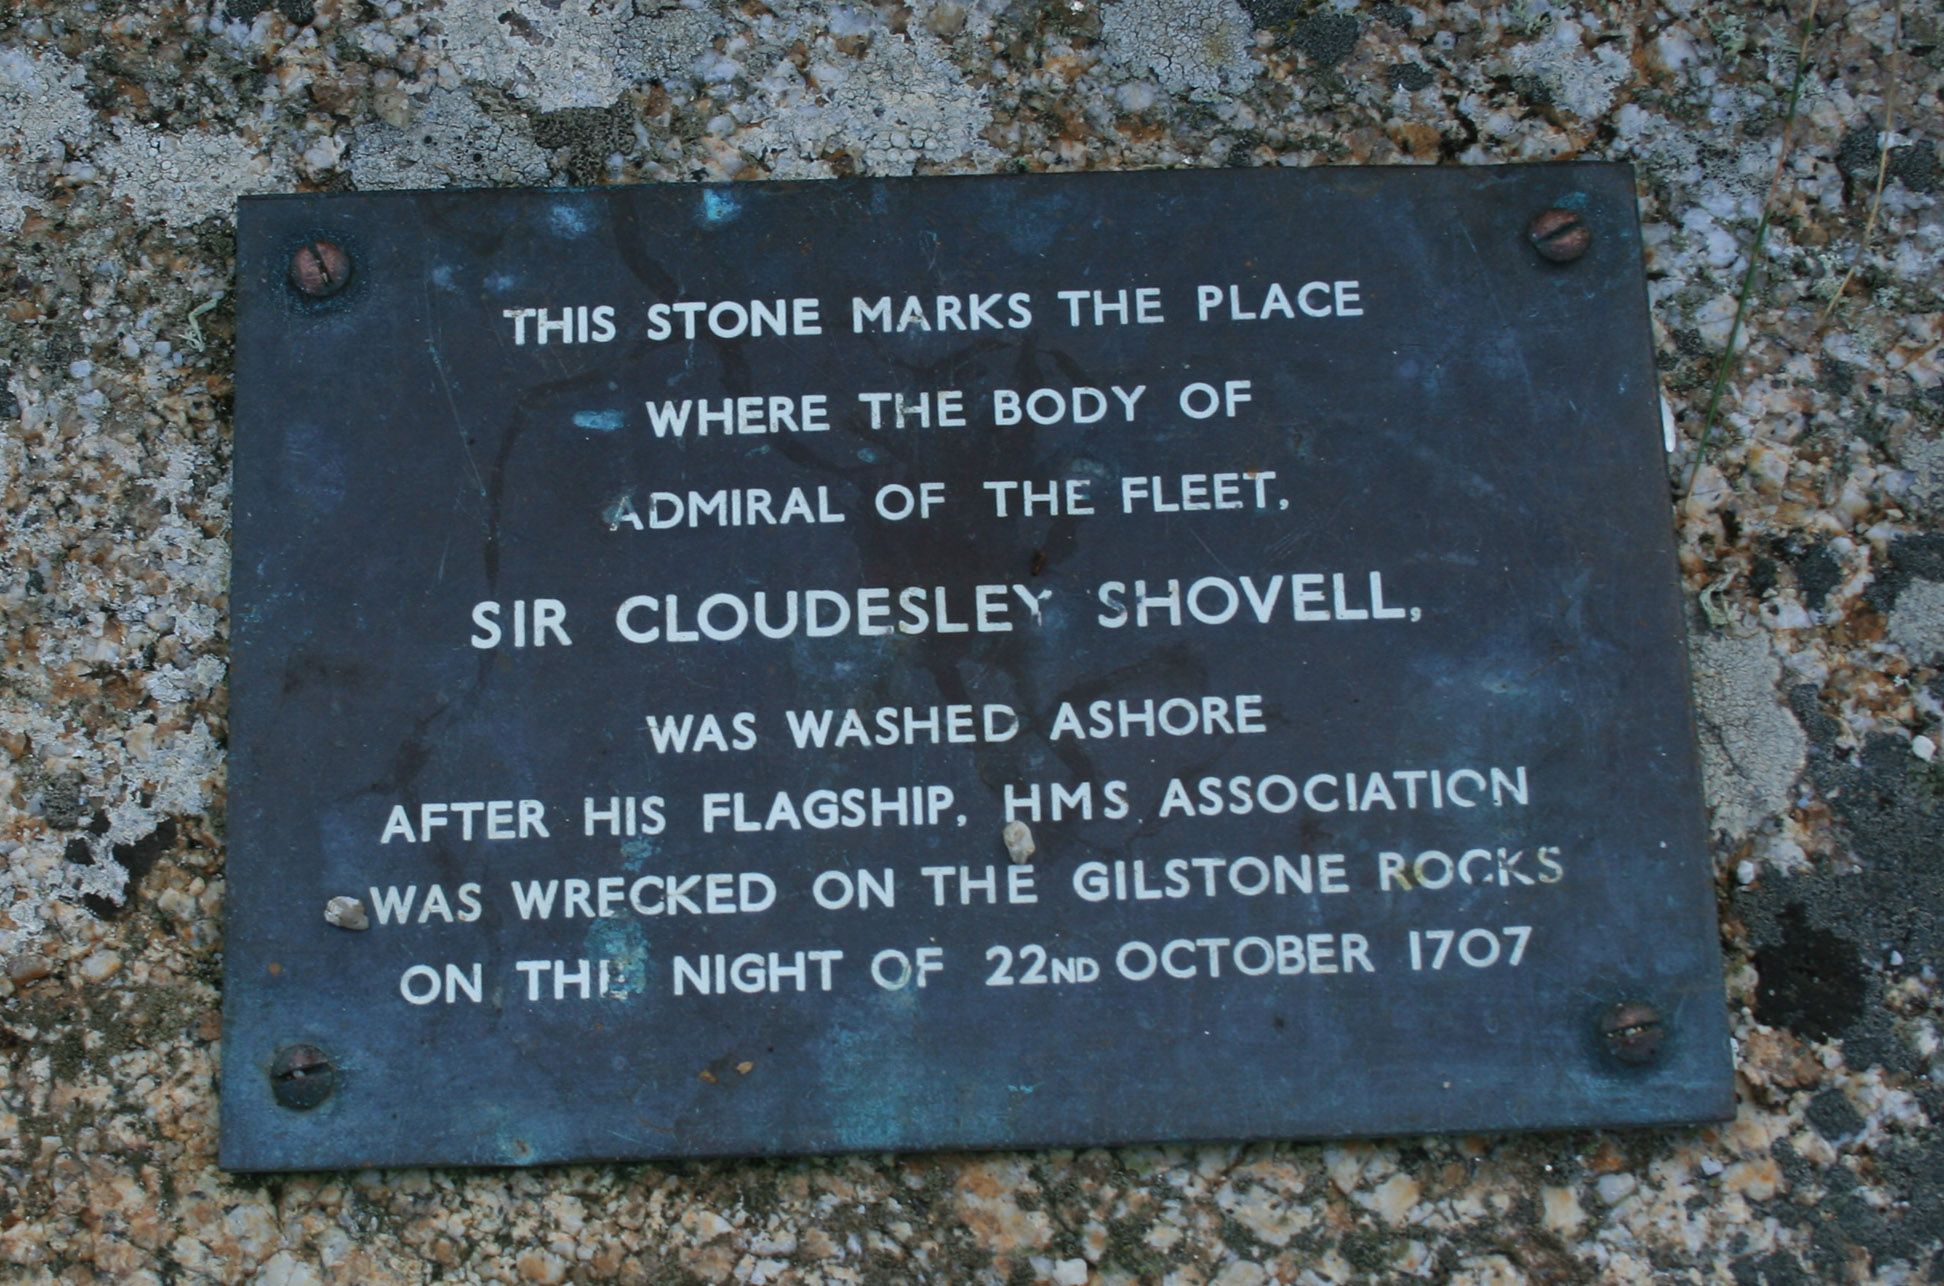 On the trail of Admiral Cloudesley Shovell